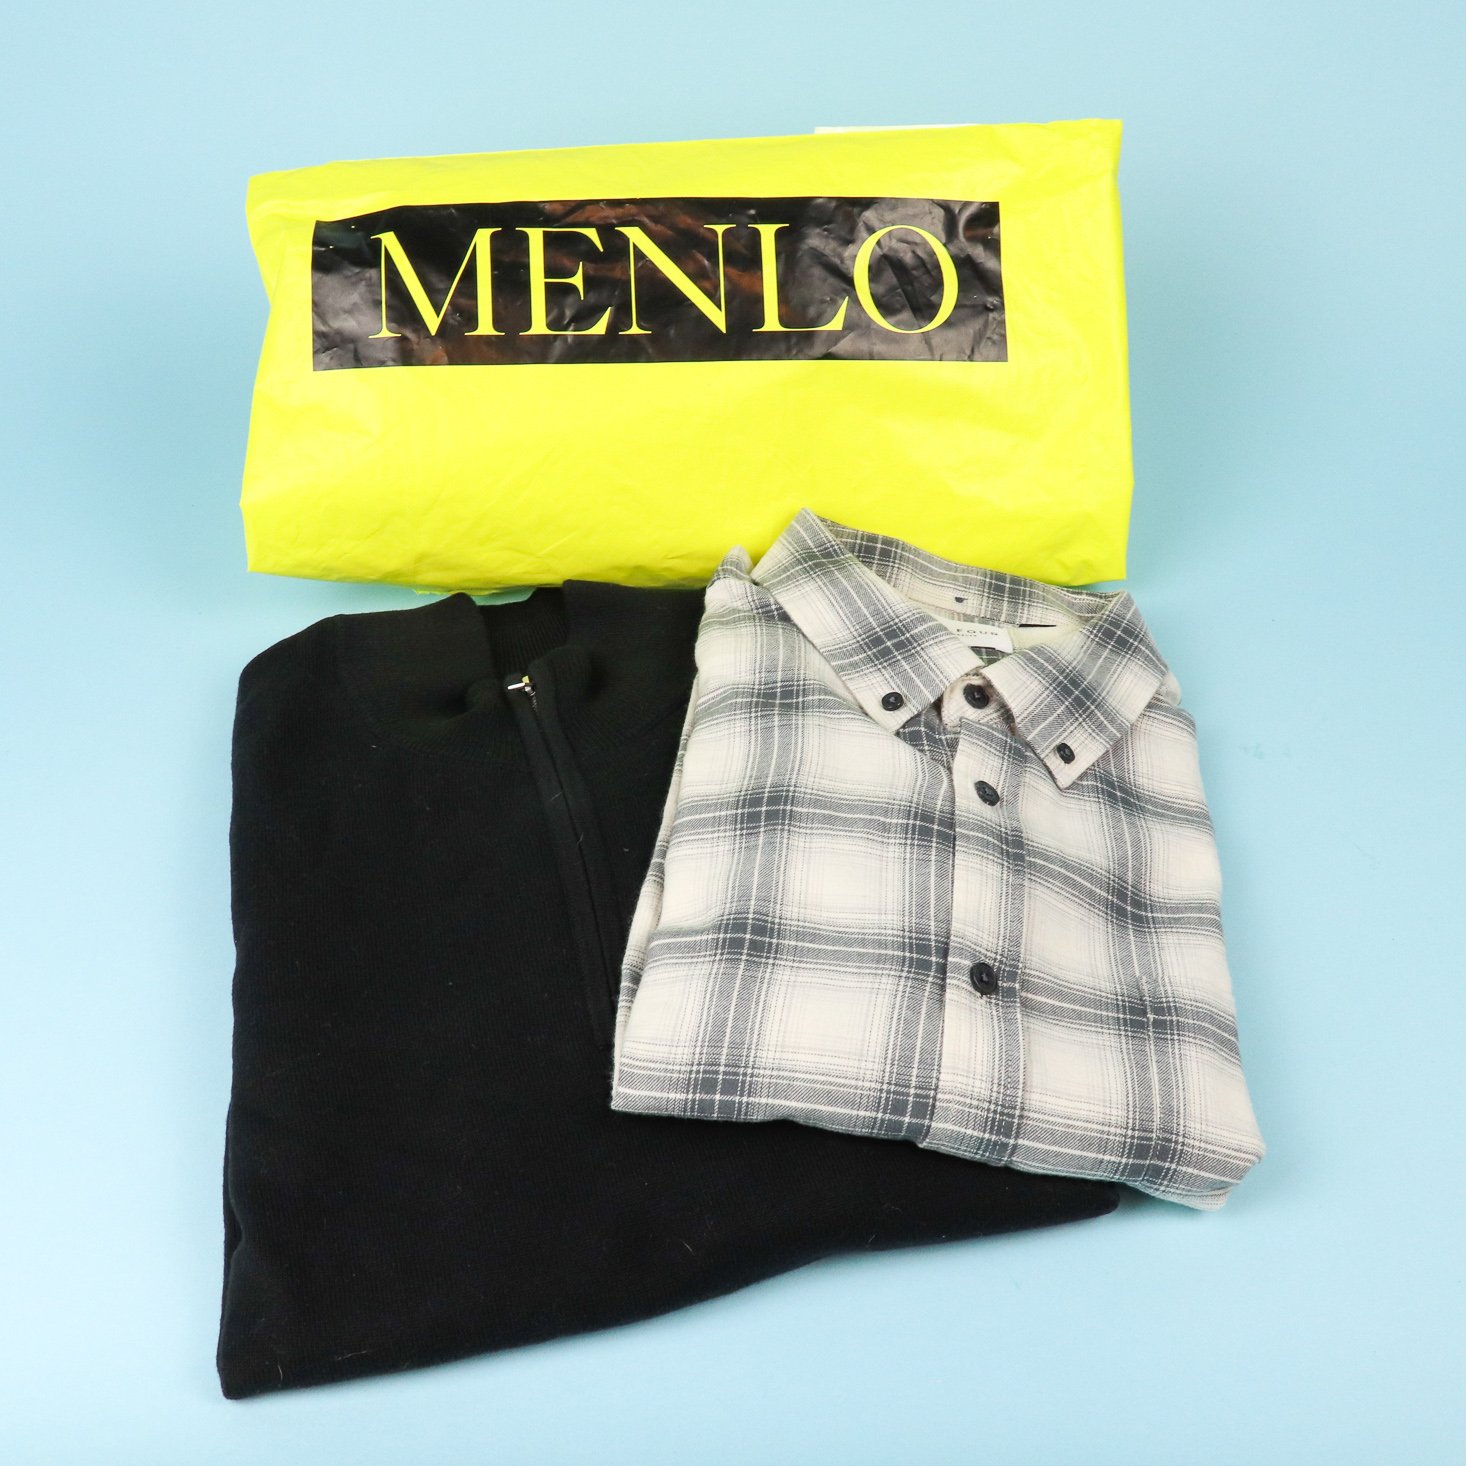 Get Your First Menlo Club Box For Only $25